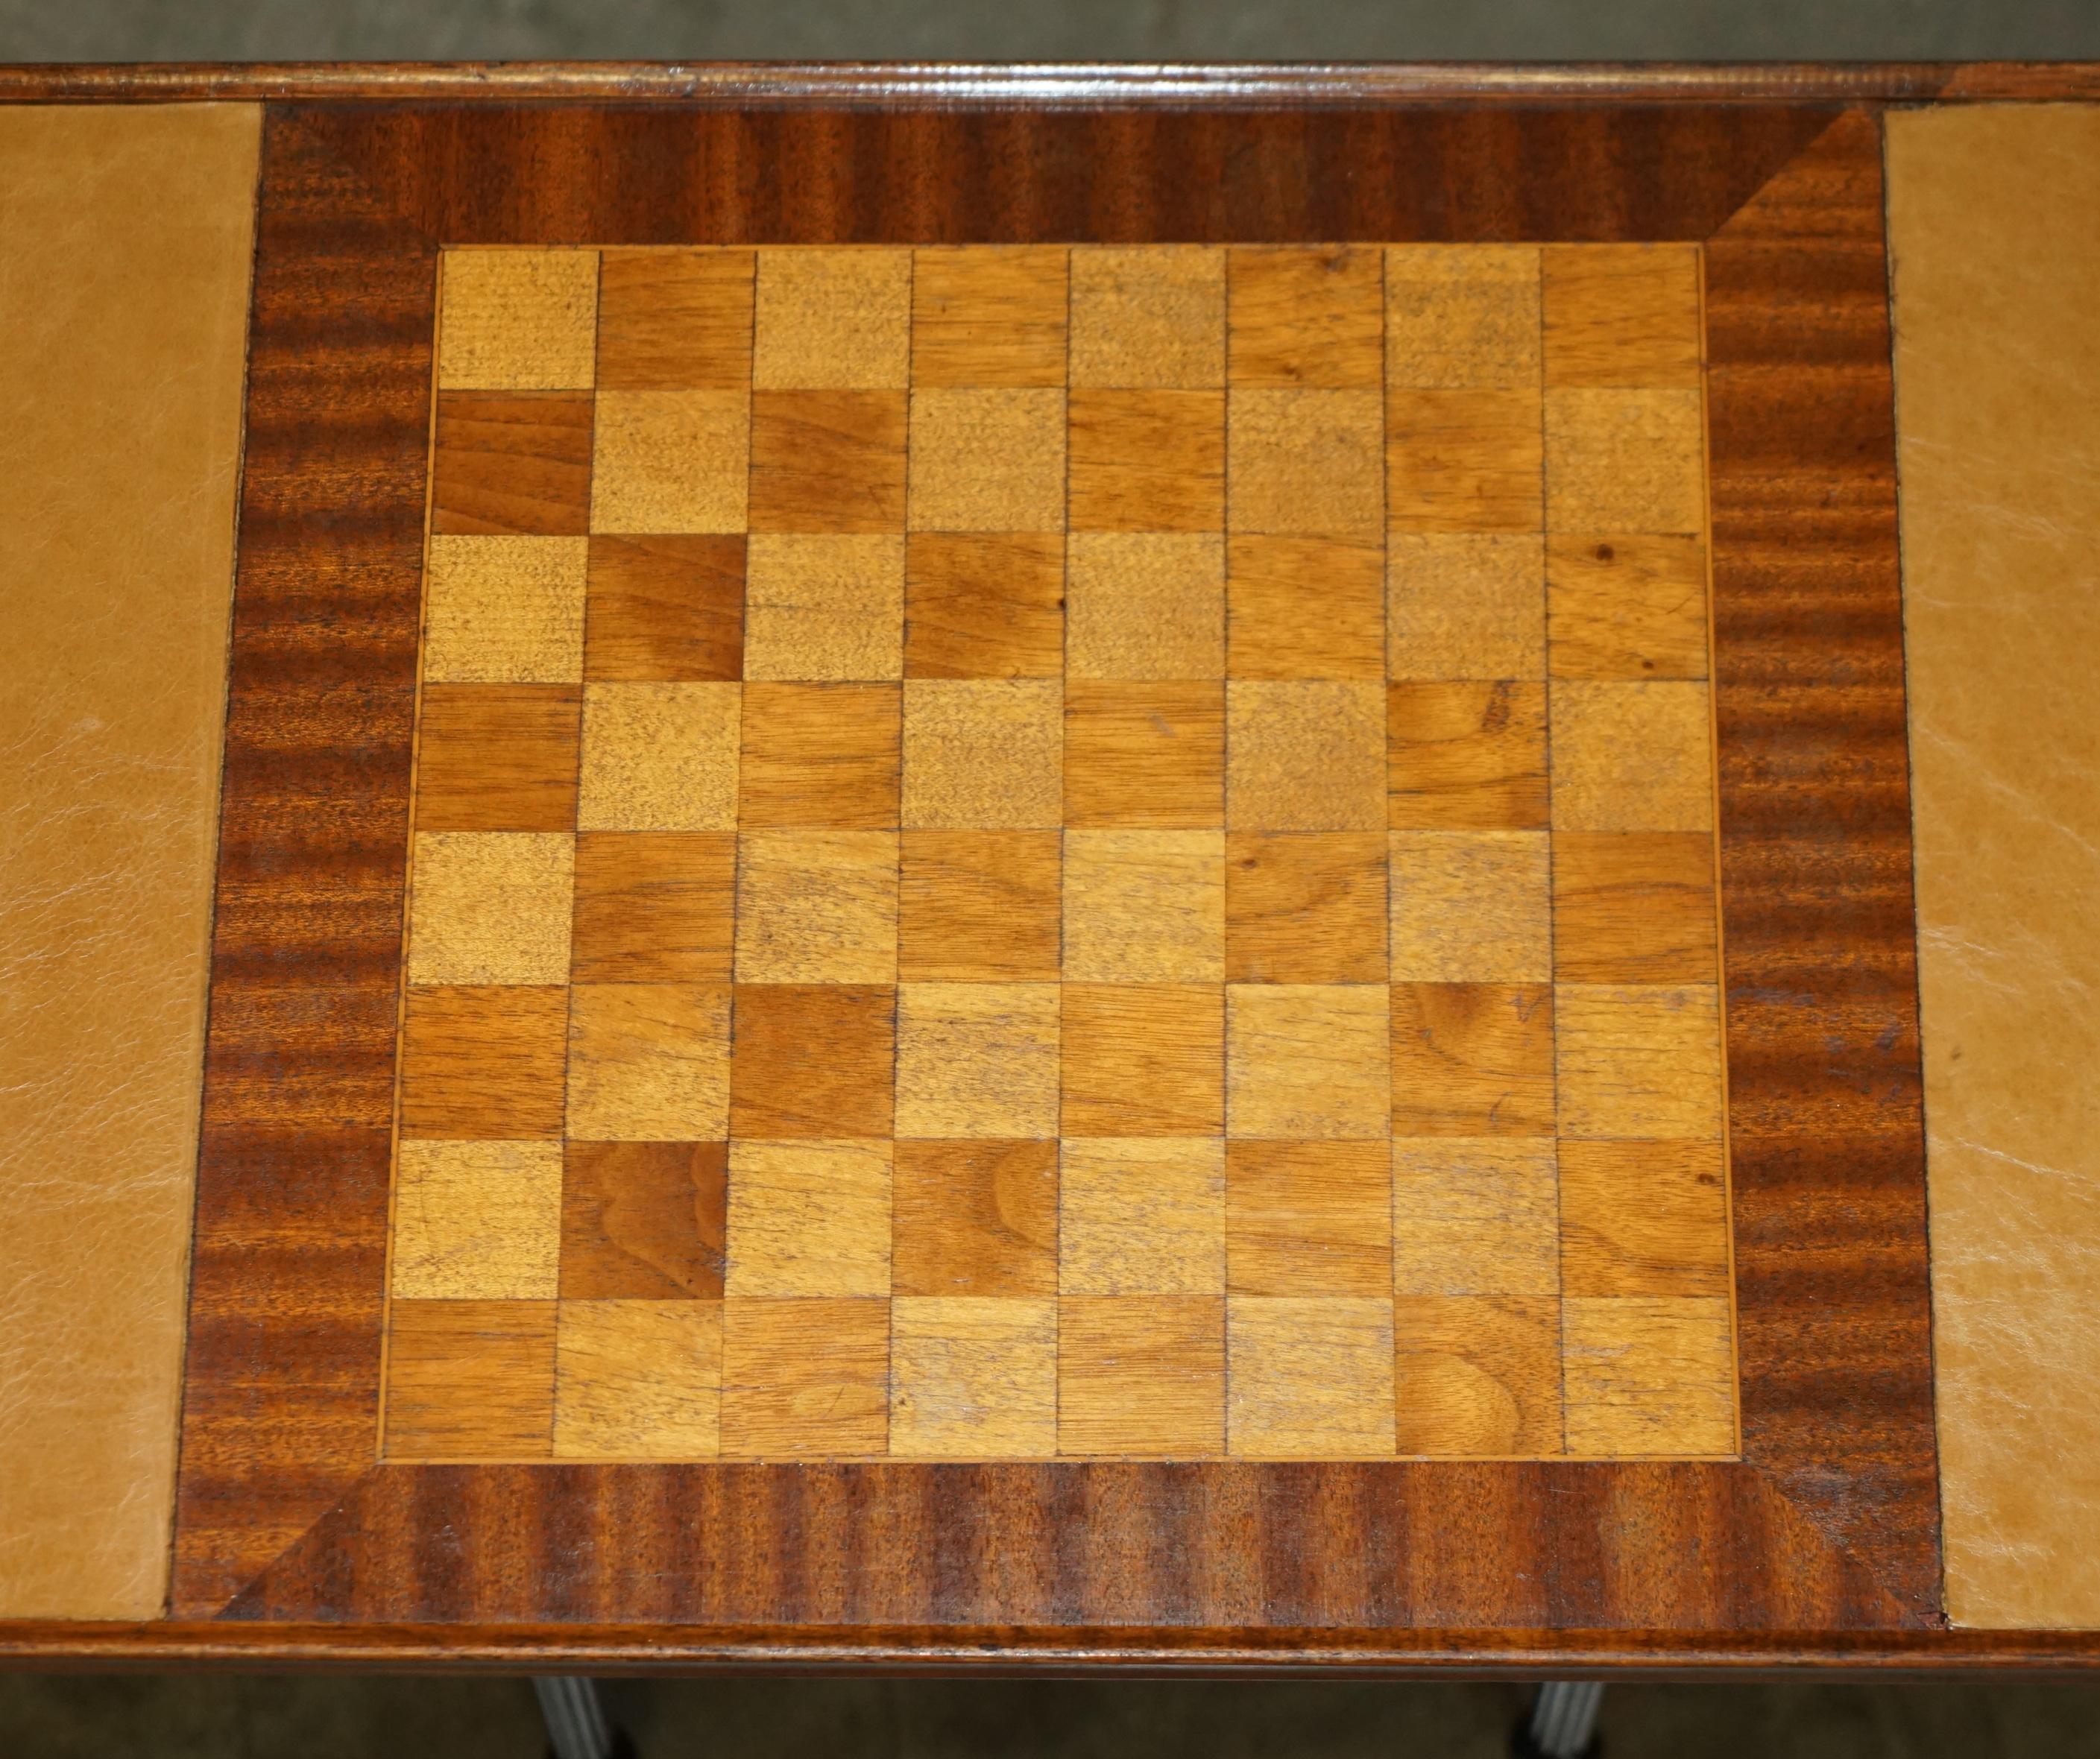 Leather VINTAGE CIRCA 1950's LEATHER TOPPED CHESSBOARD COFFEE NEST OF TABLES FOR CHESS! For Sale